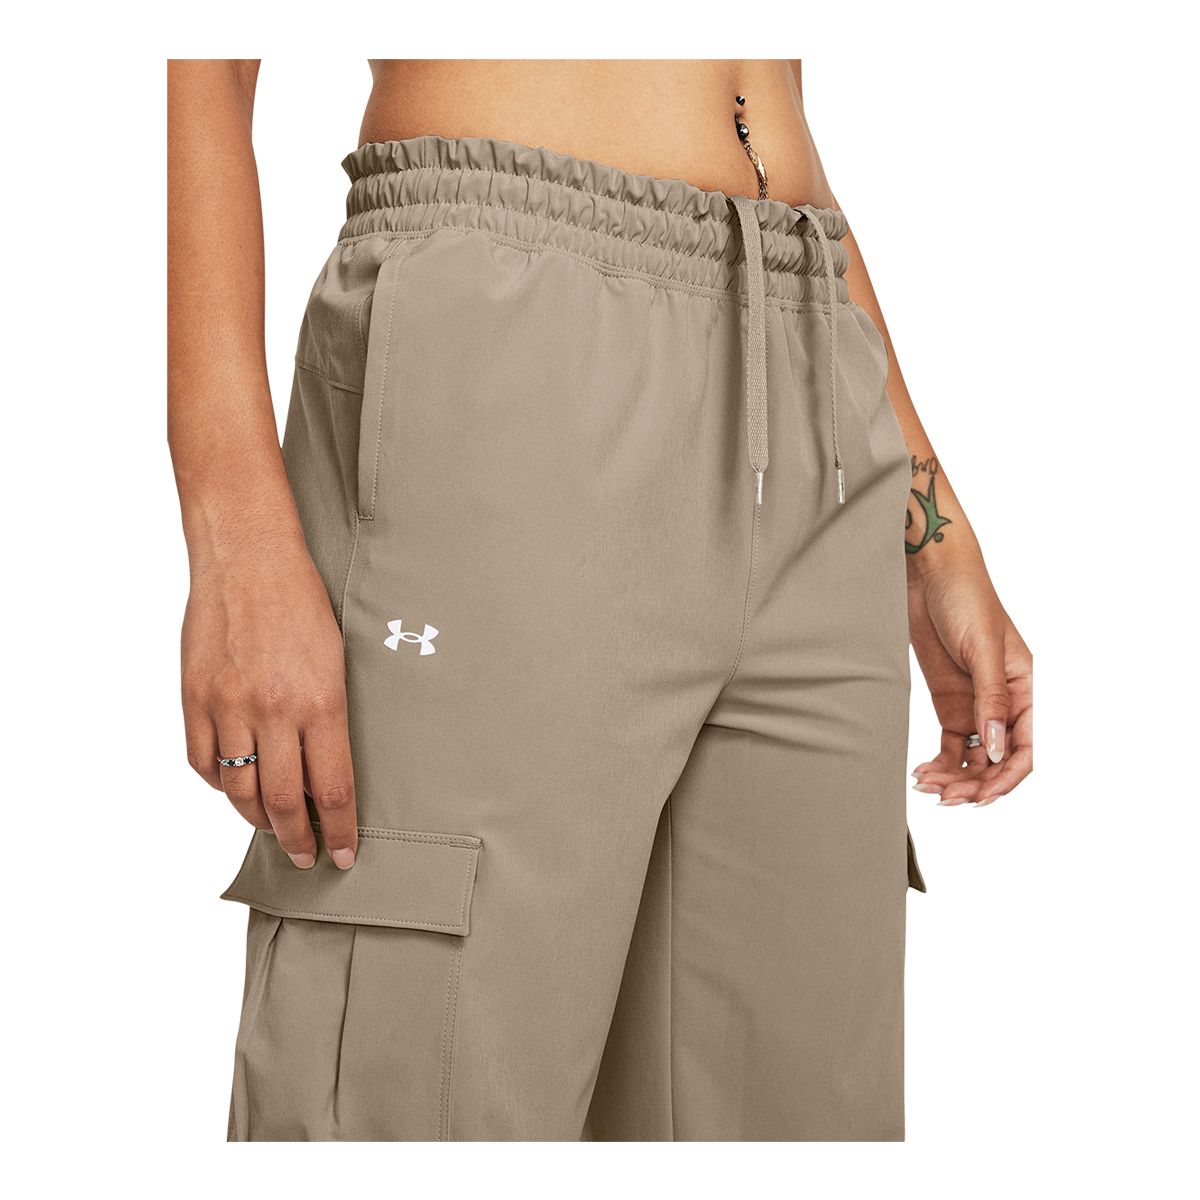 Under Armour Women's Train Anywhere Pants, Training, Outdoor